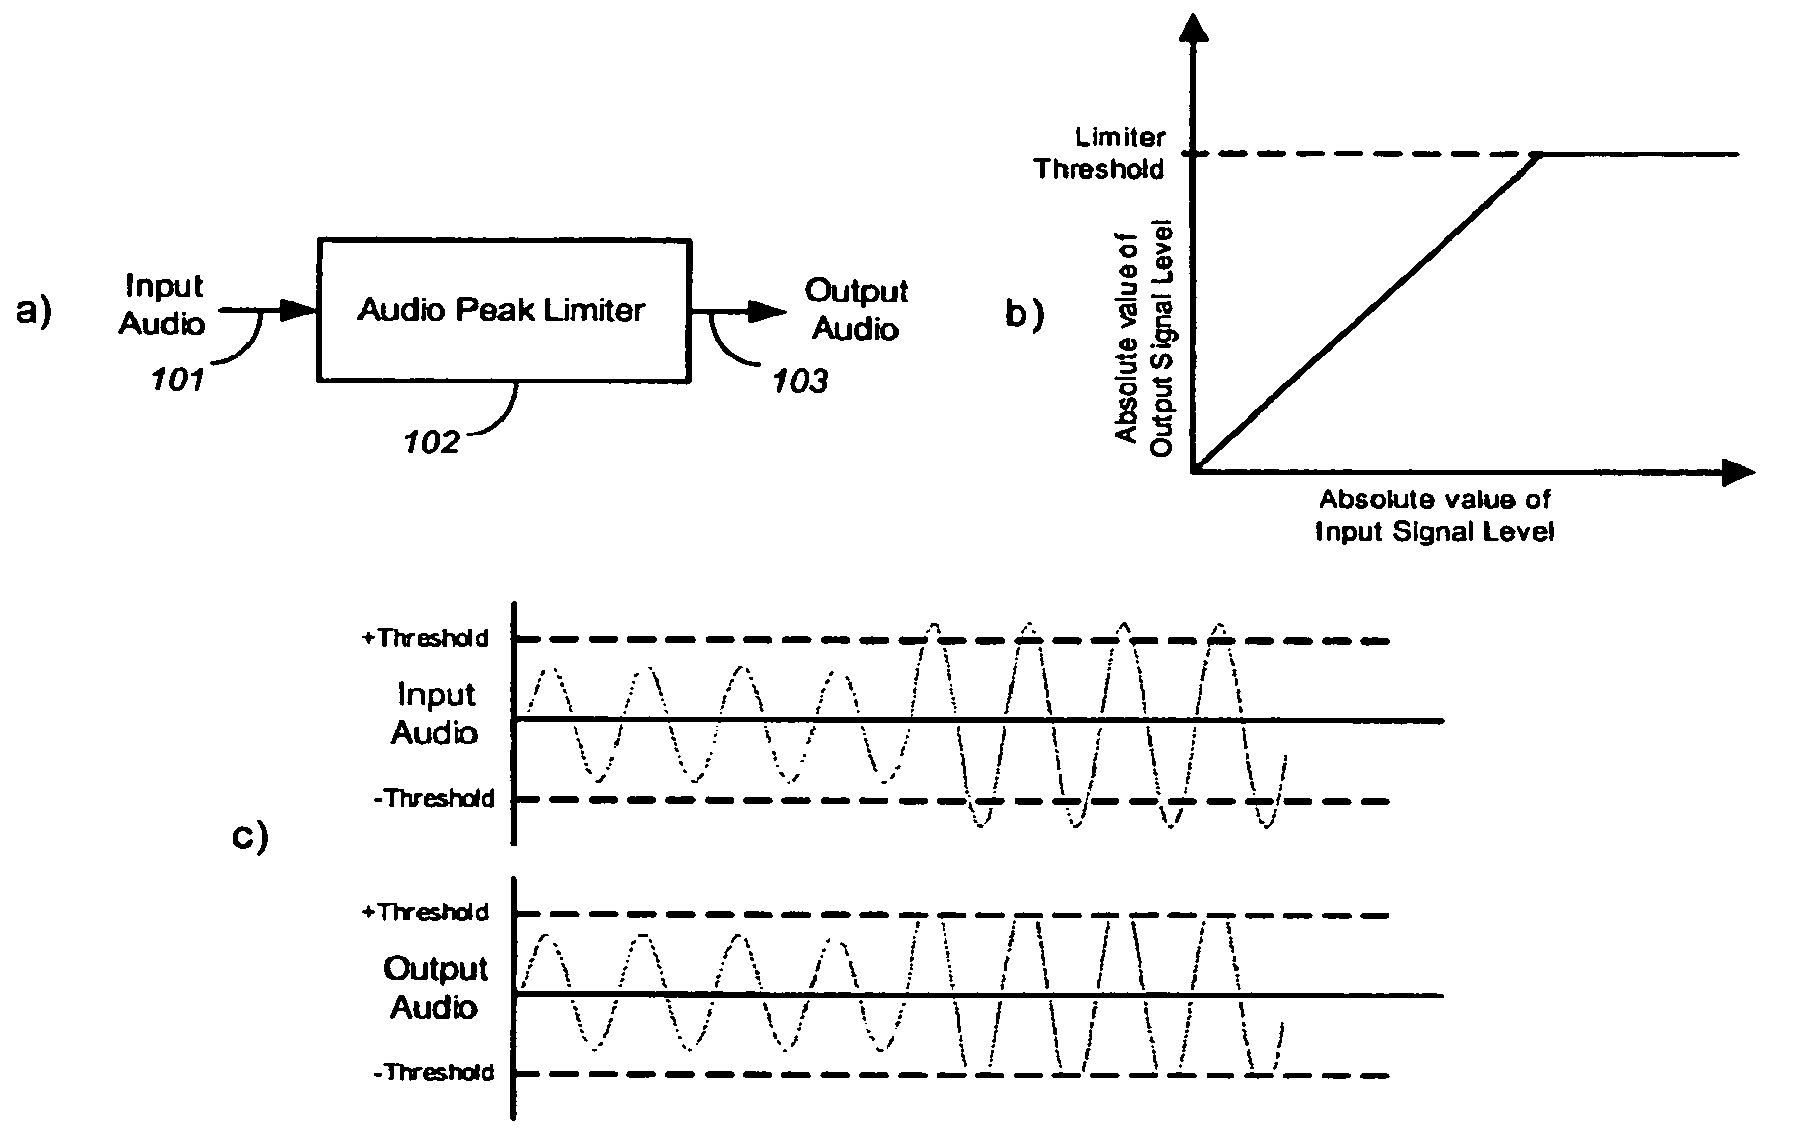 Audio-peak limiting in slow and fast stages